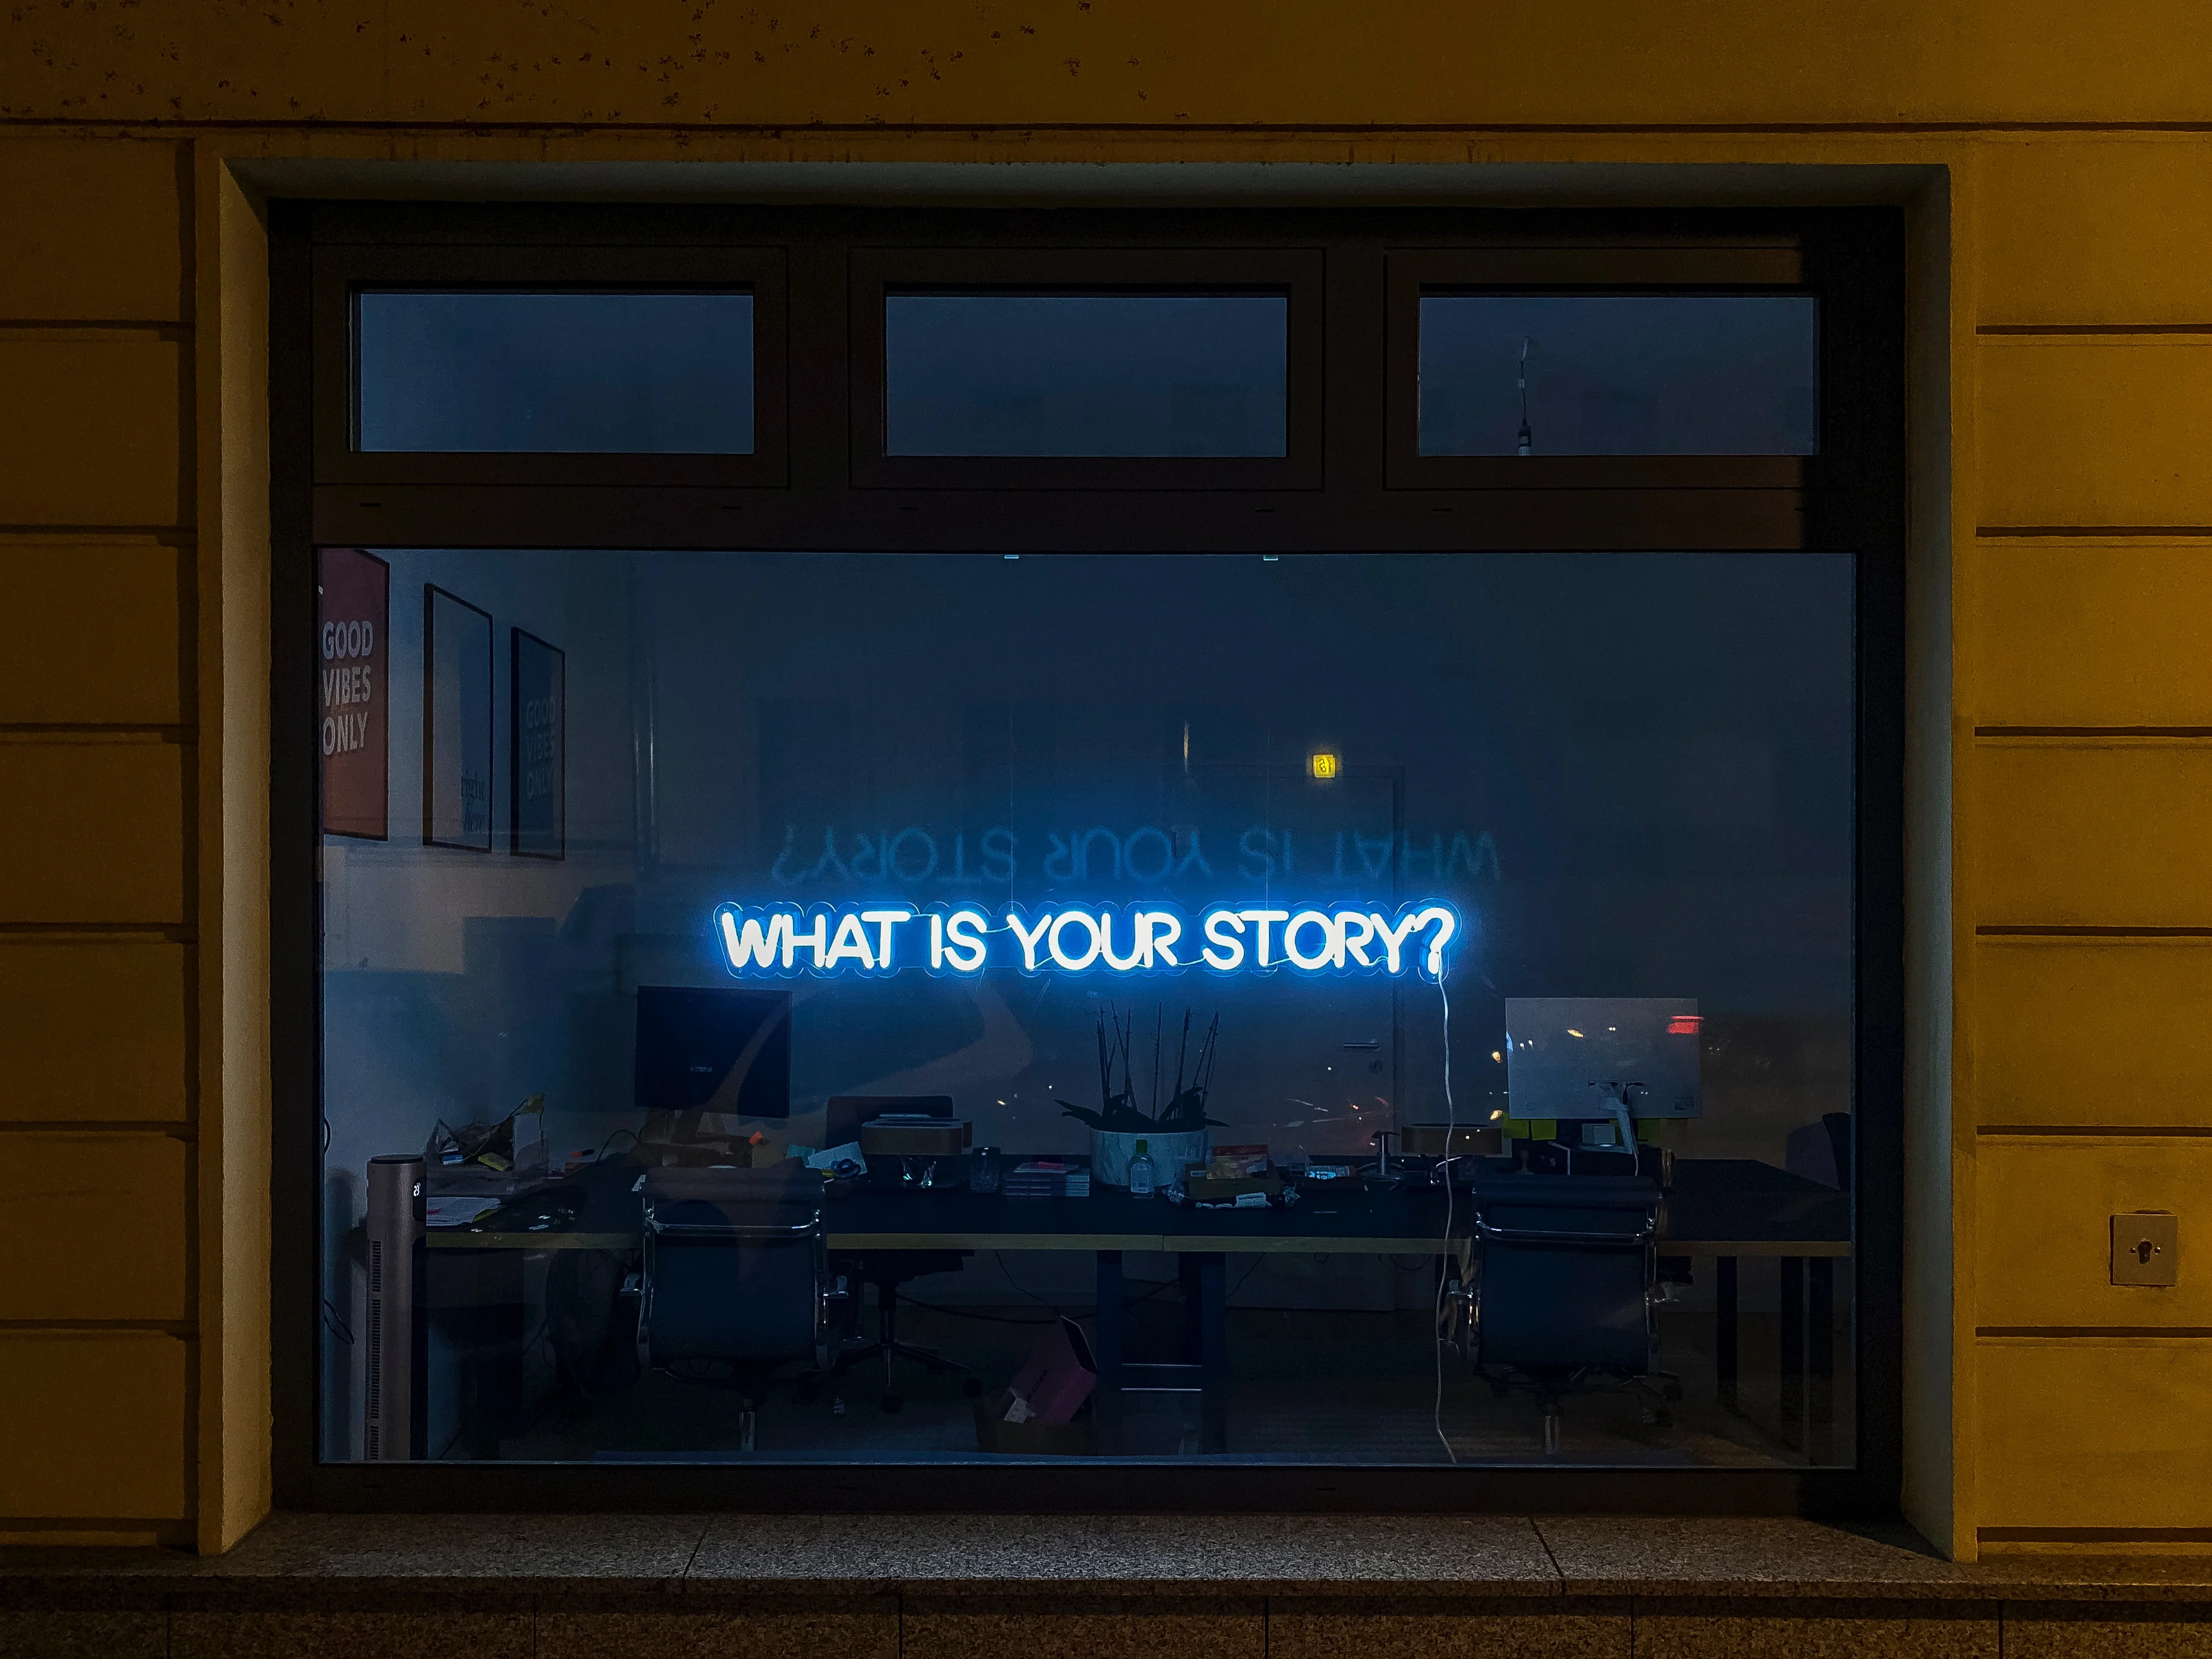 A neon sign that says “What is your story?” can be seen on a glass window.